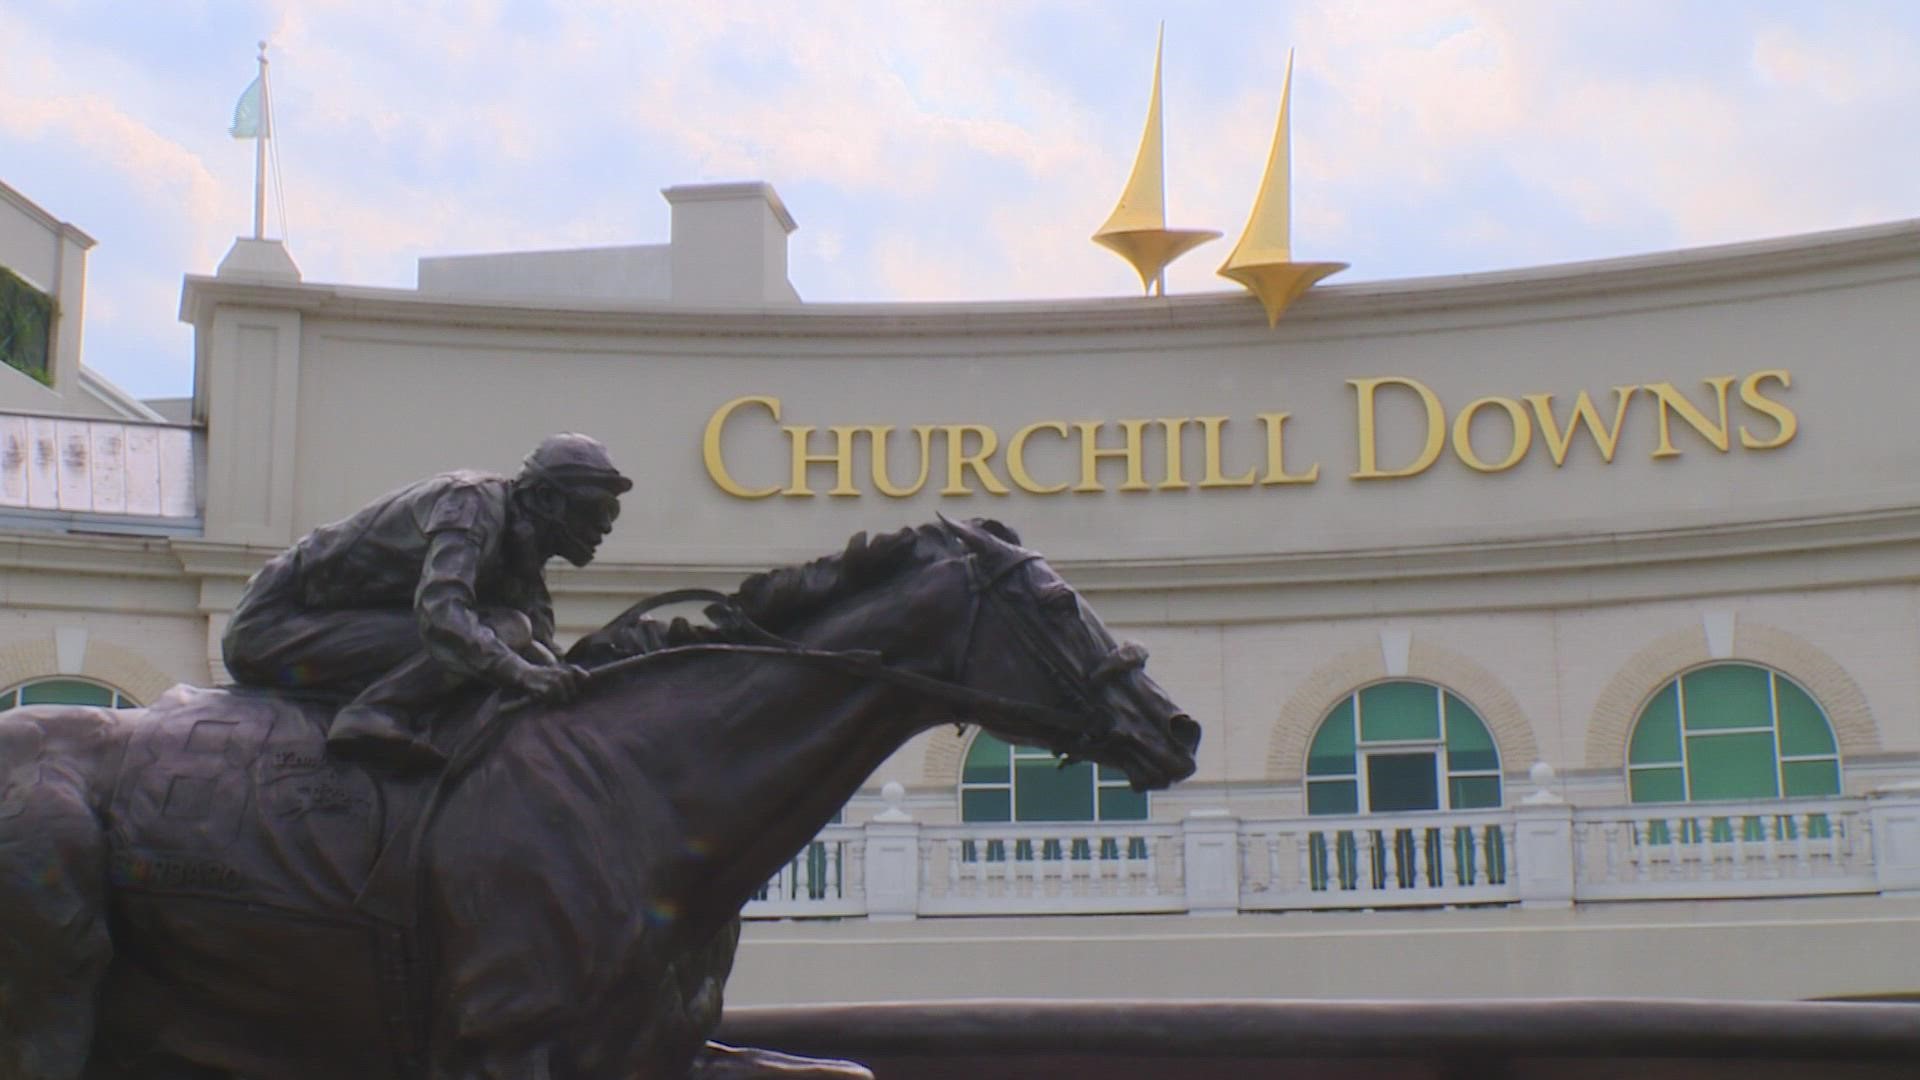 For a complete schedule of events at Churchill Downs, visit churchilldowns.com.